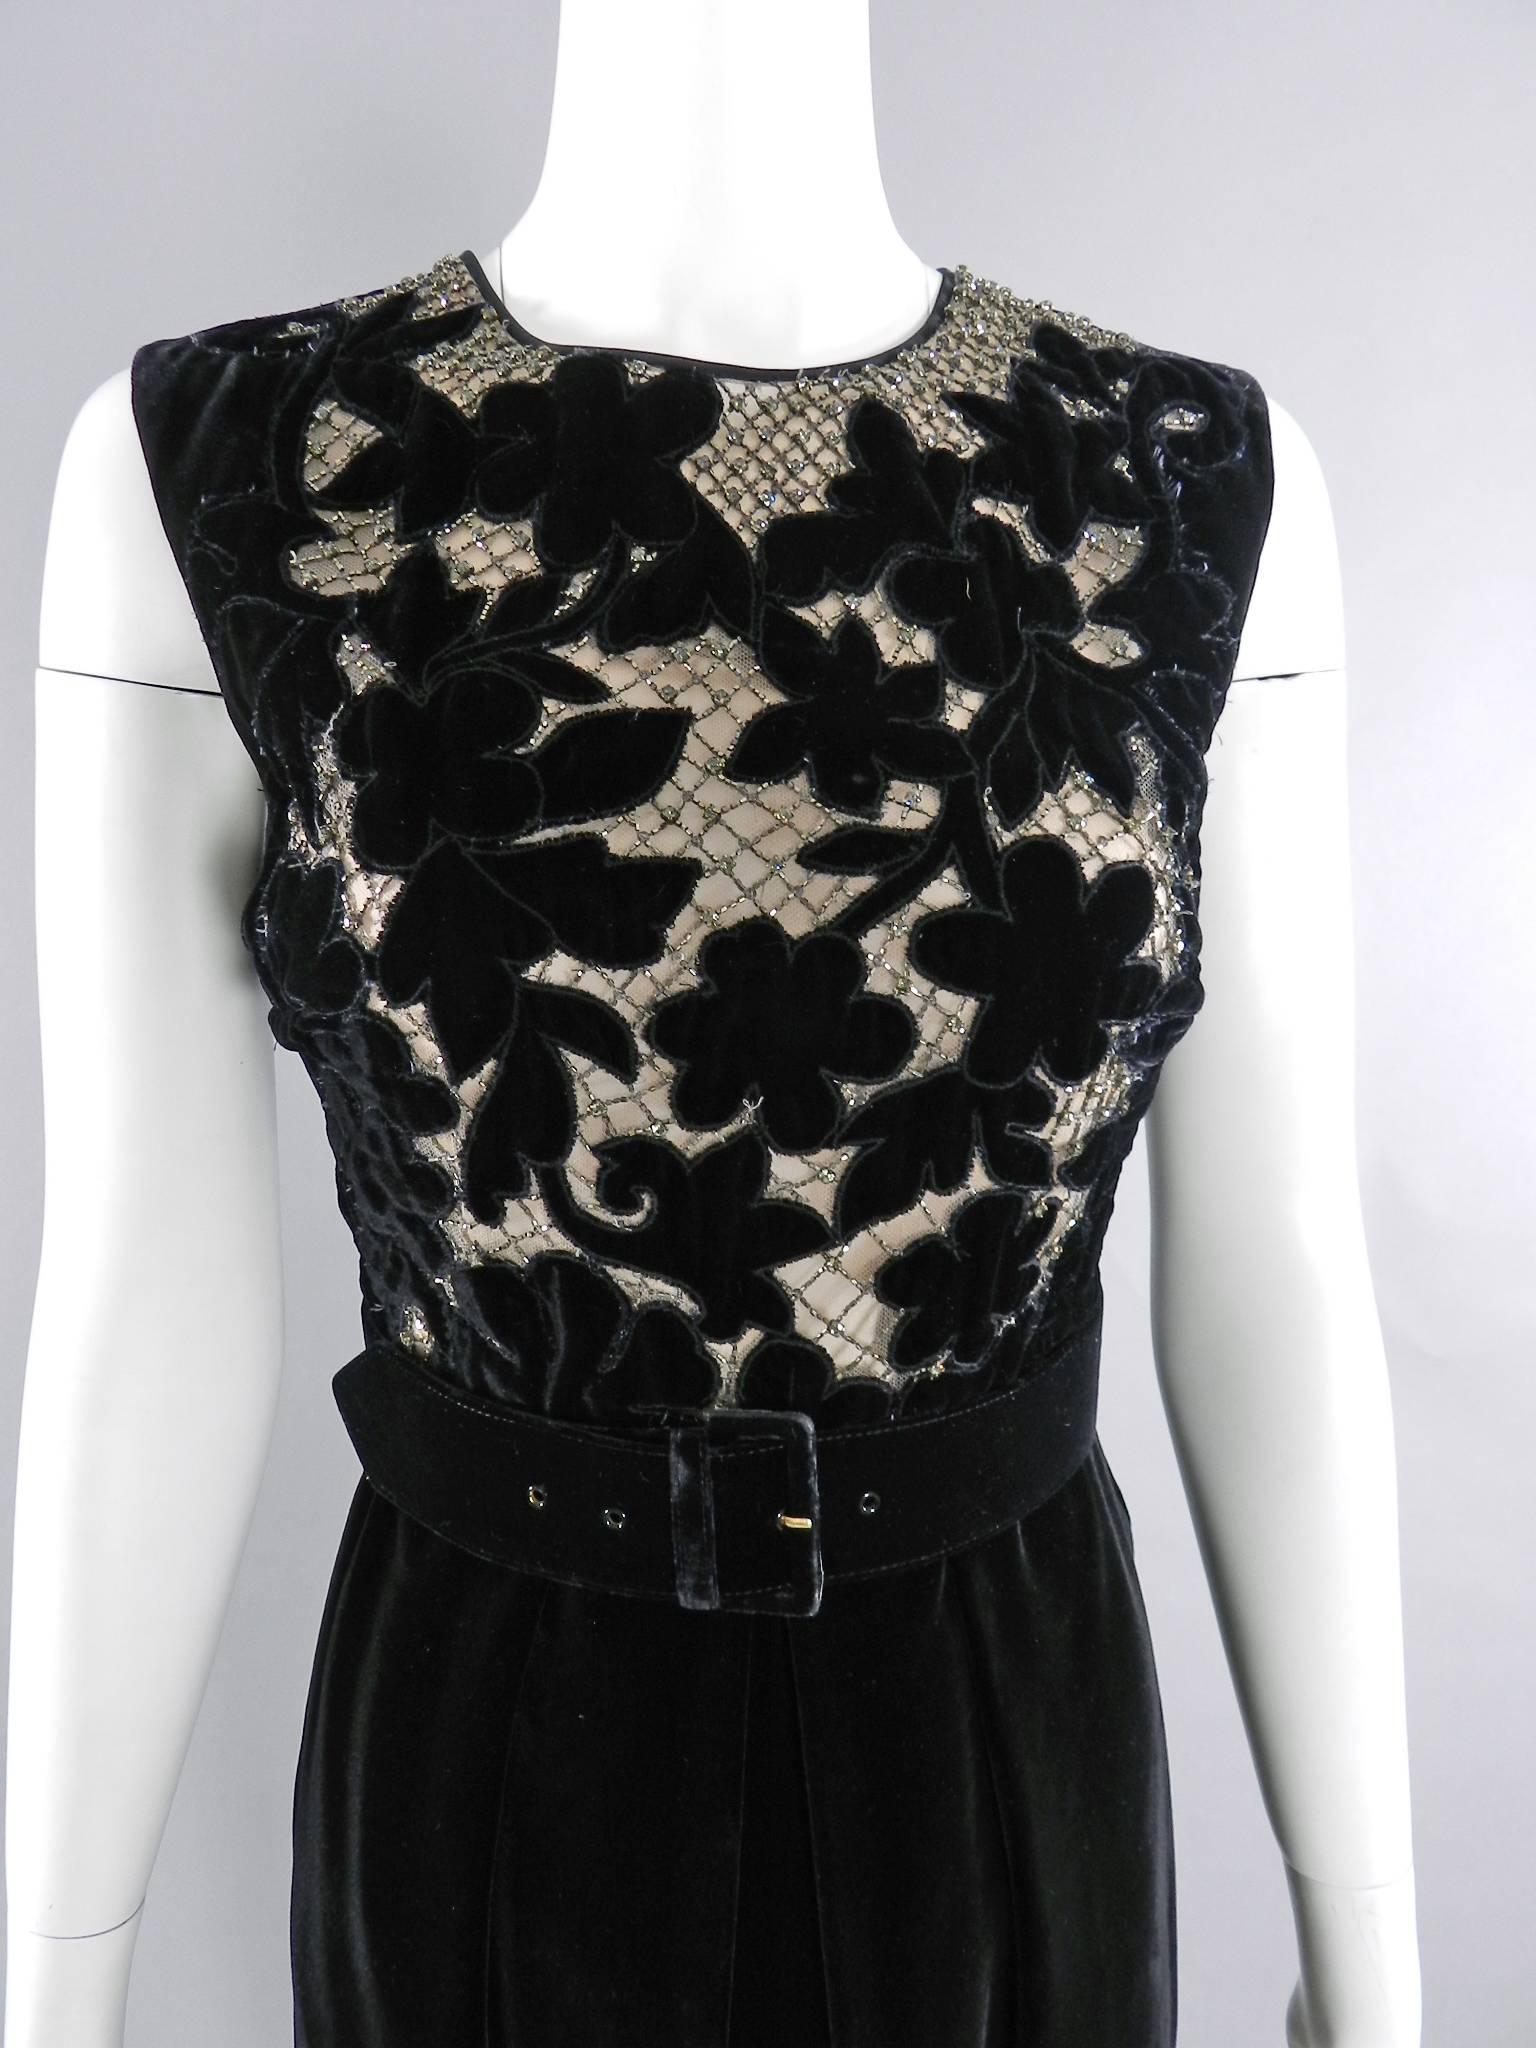 Valentino Black Velvet Cocktail Dress. Bodice has a cut-out lace design backed with net fabric and nude lining decorated with rhinestones. Centre back zipper, sleeveless design, wide belt. Excellent pre-owned condition.

Tagged size IT 44 (USA 8).